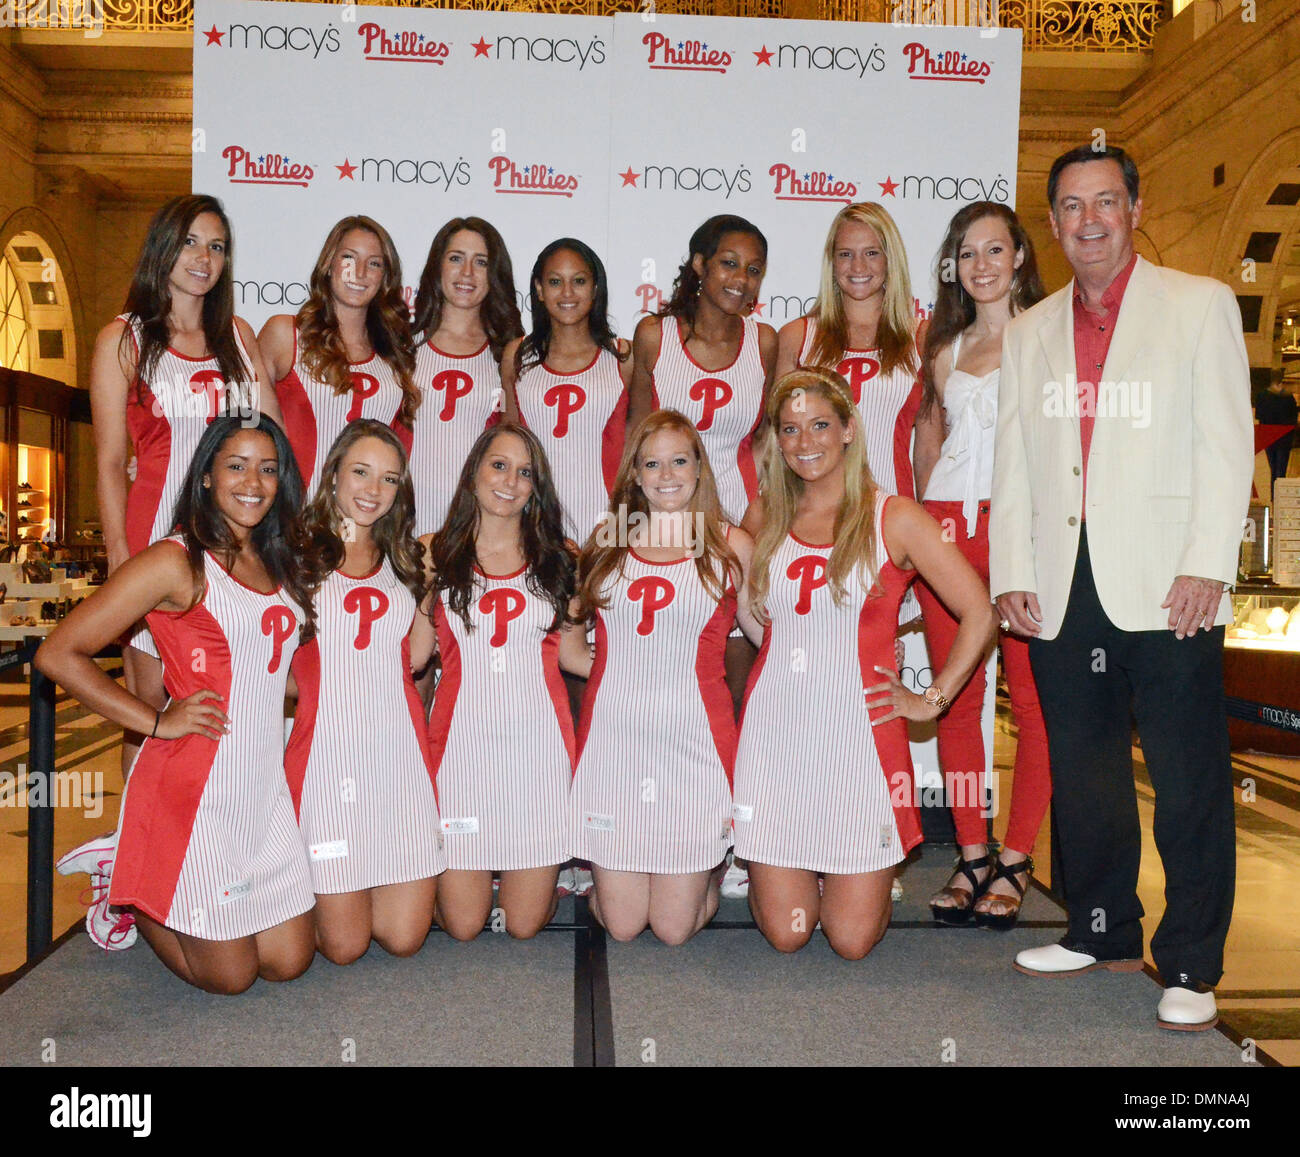 Phillies name new ballgirls, including twins